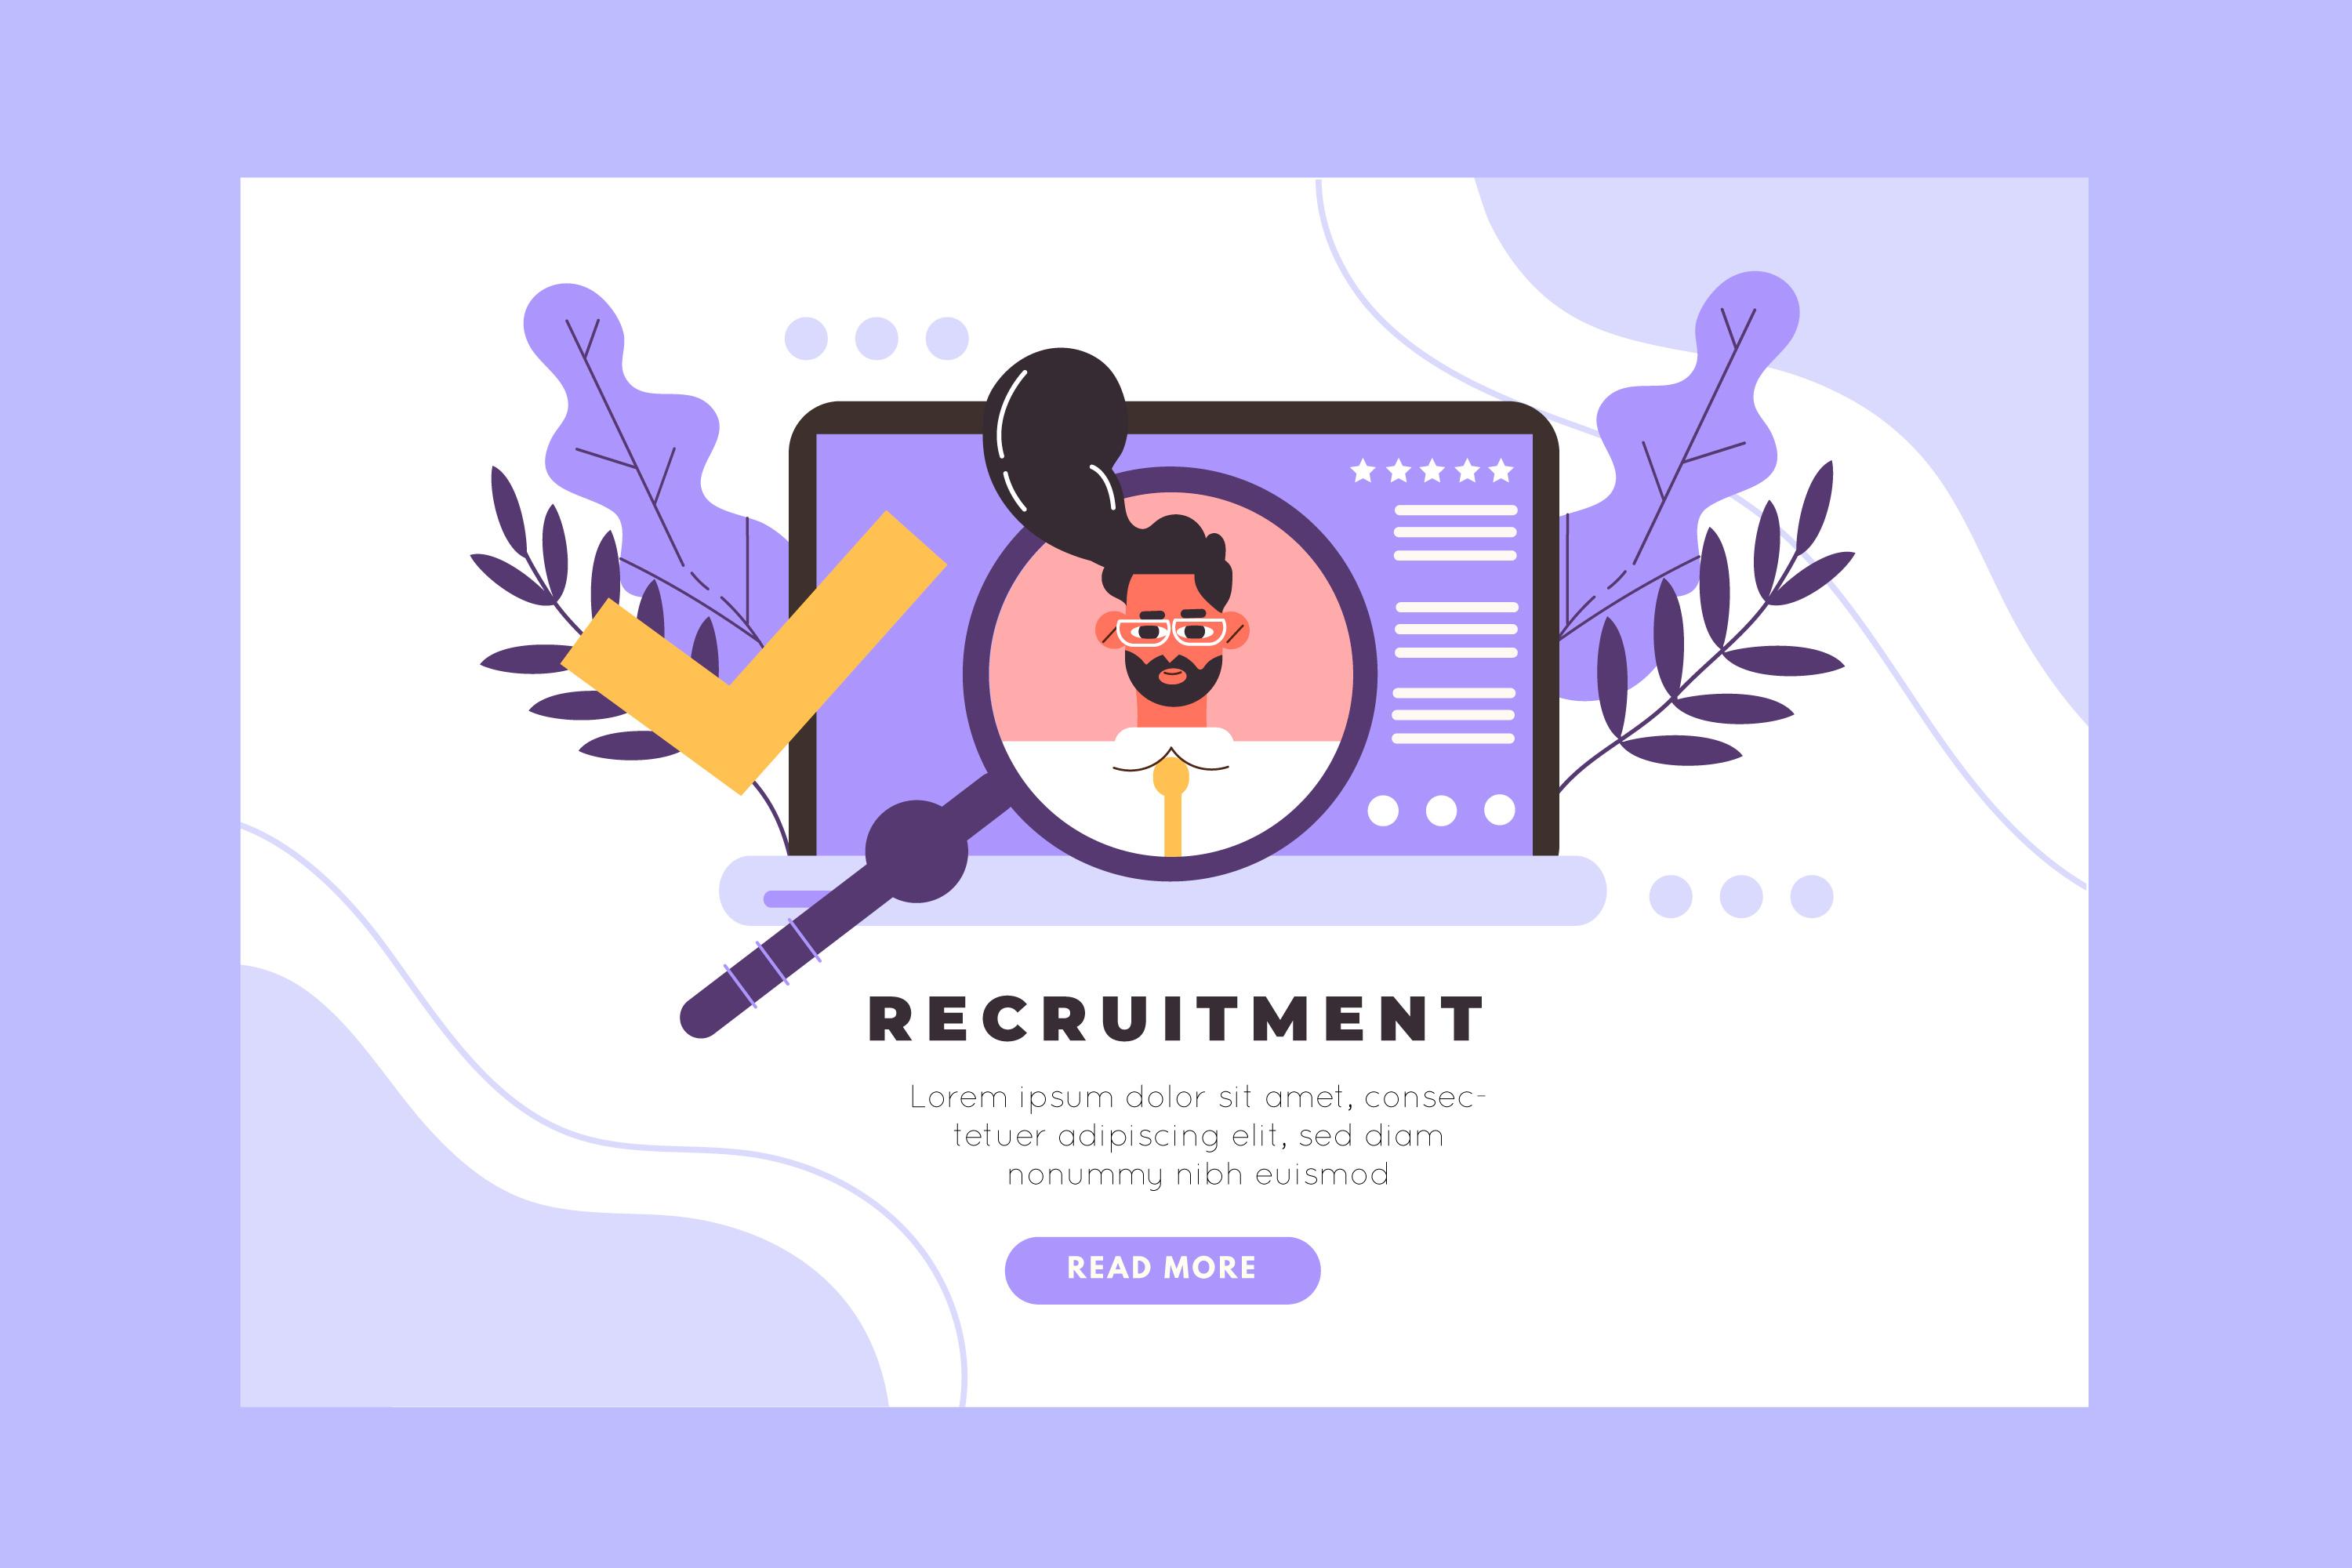 image for <p>The command will function as a recruitment manager, specializing in finding talented professionals for a job of your choice. It will provide a job posting, where you can add job requirements, benefits, and skills.</p>